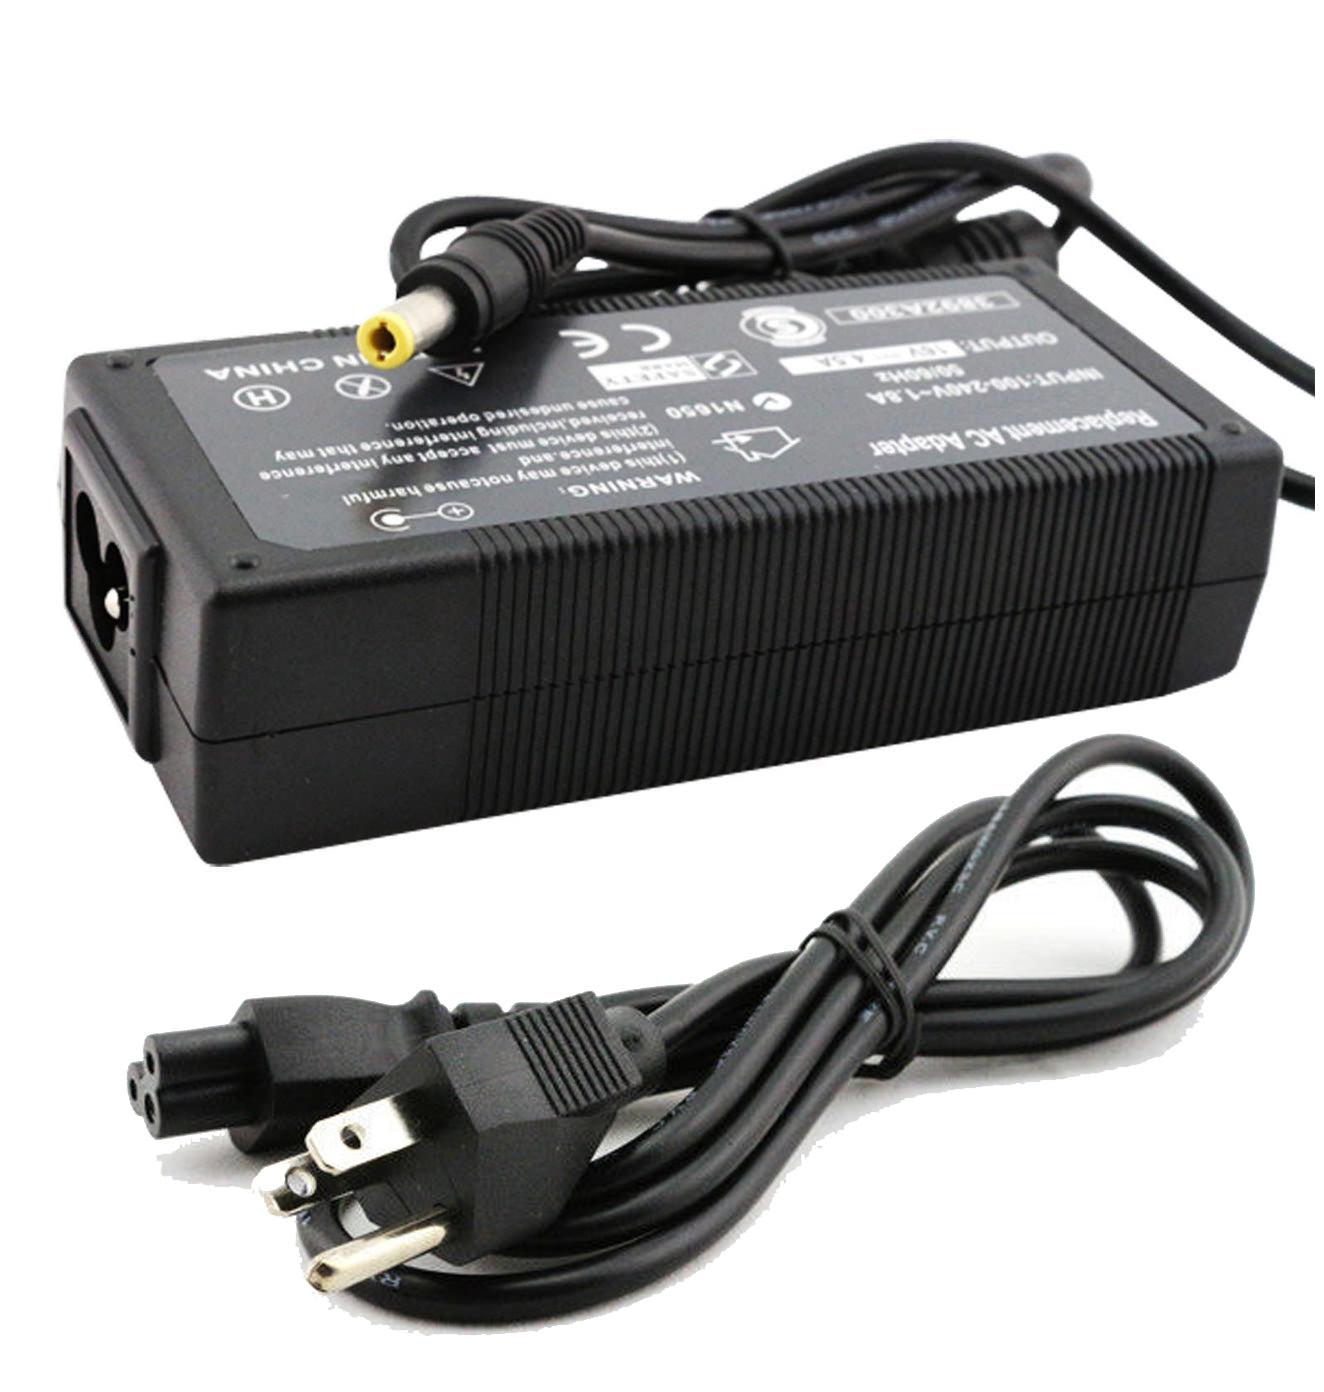 AC Adapter Charger for IBM ThinkPad X31 Notebook.